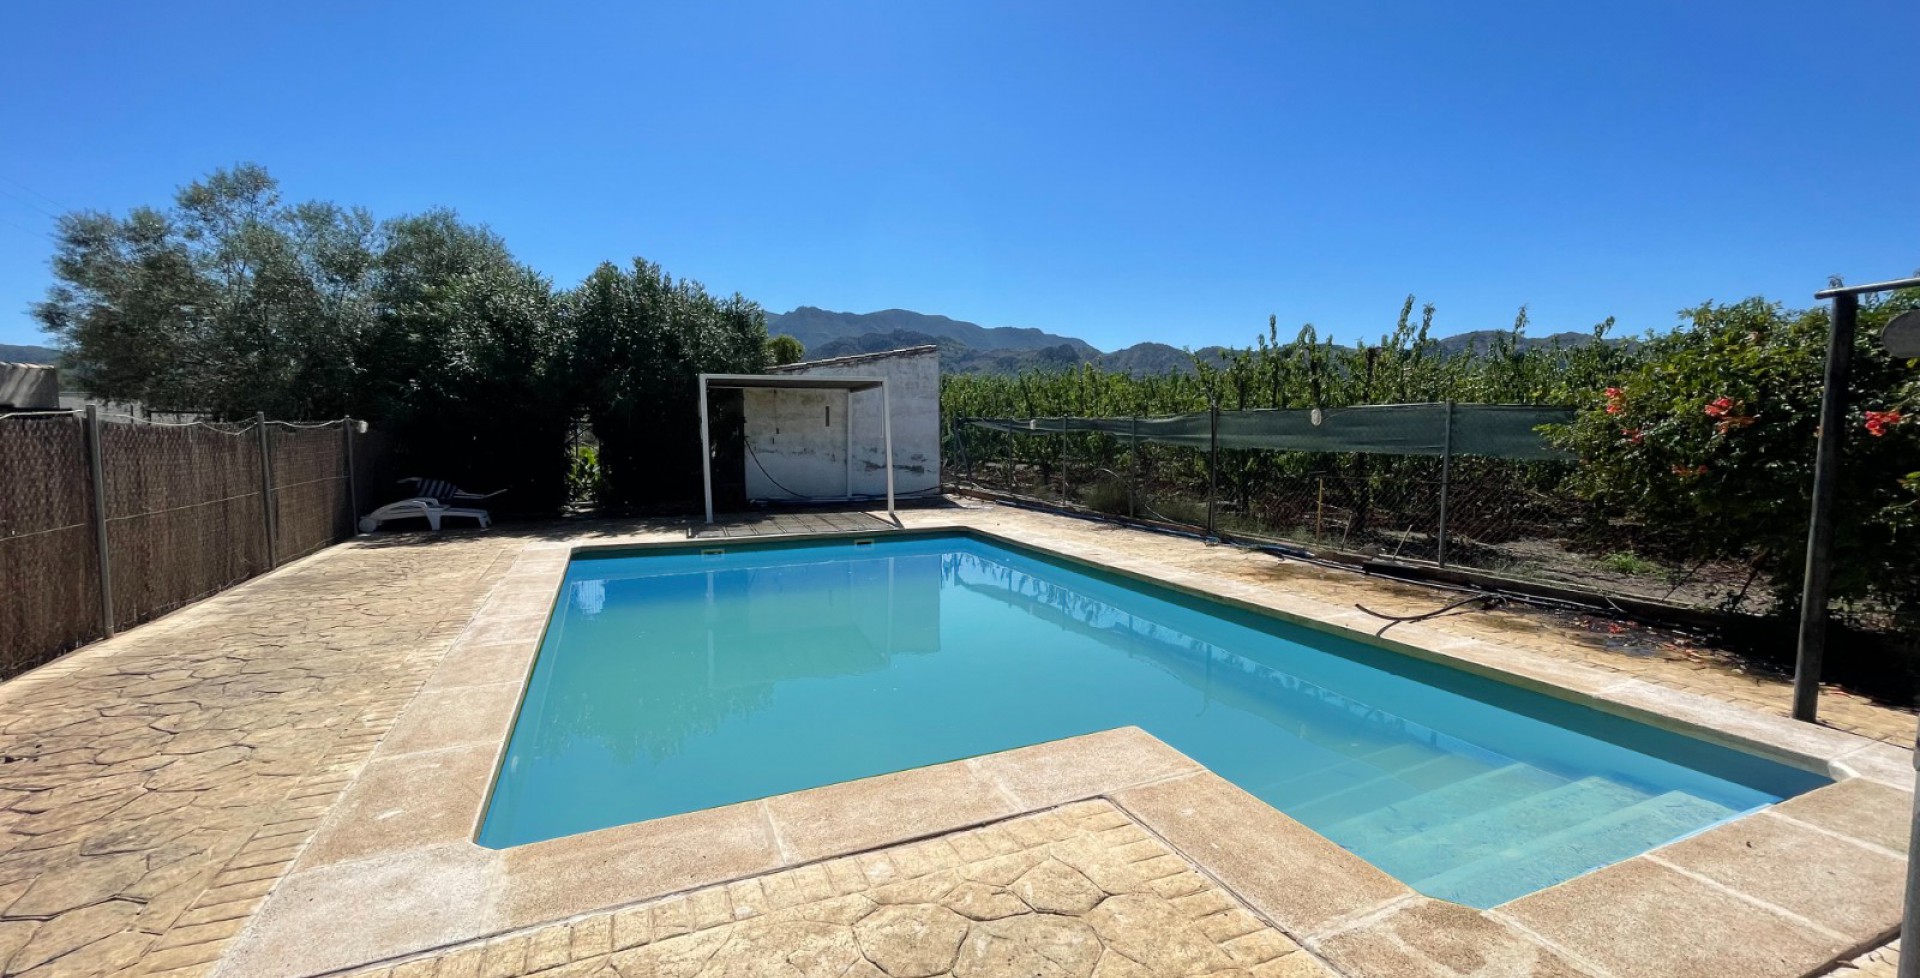 Great Swimming pool at detached country house Cieza, Murcia, Spain 